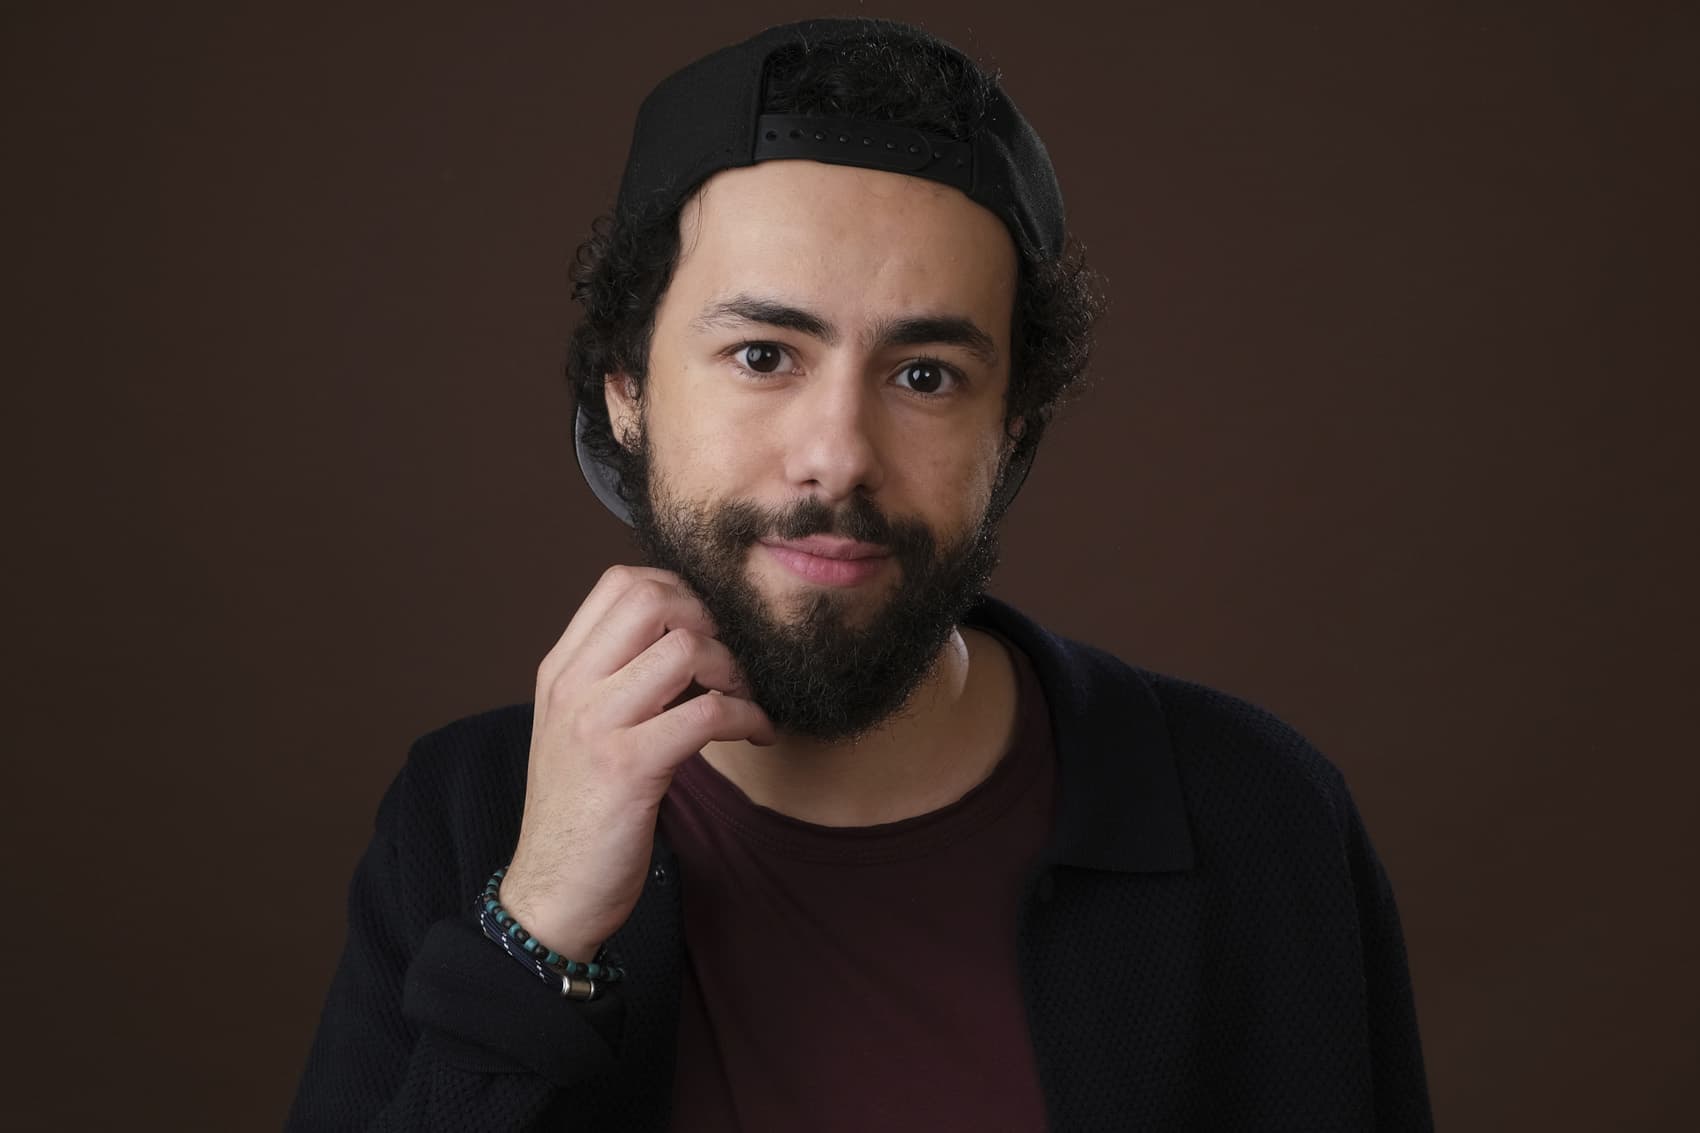 'That Means I'm Not A Good Muslim?' Islam In Today's World With 'Ramy